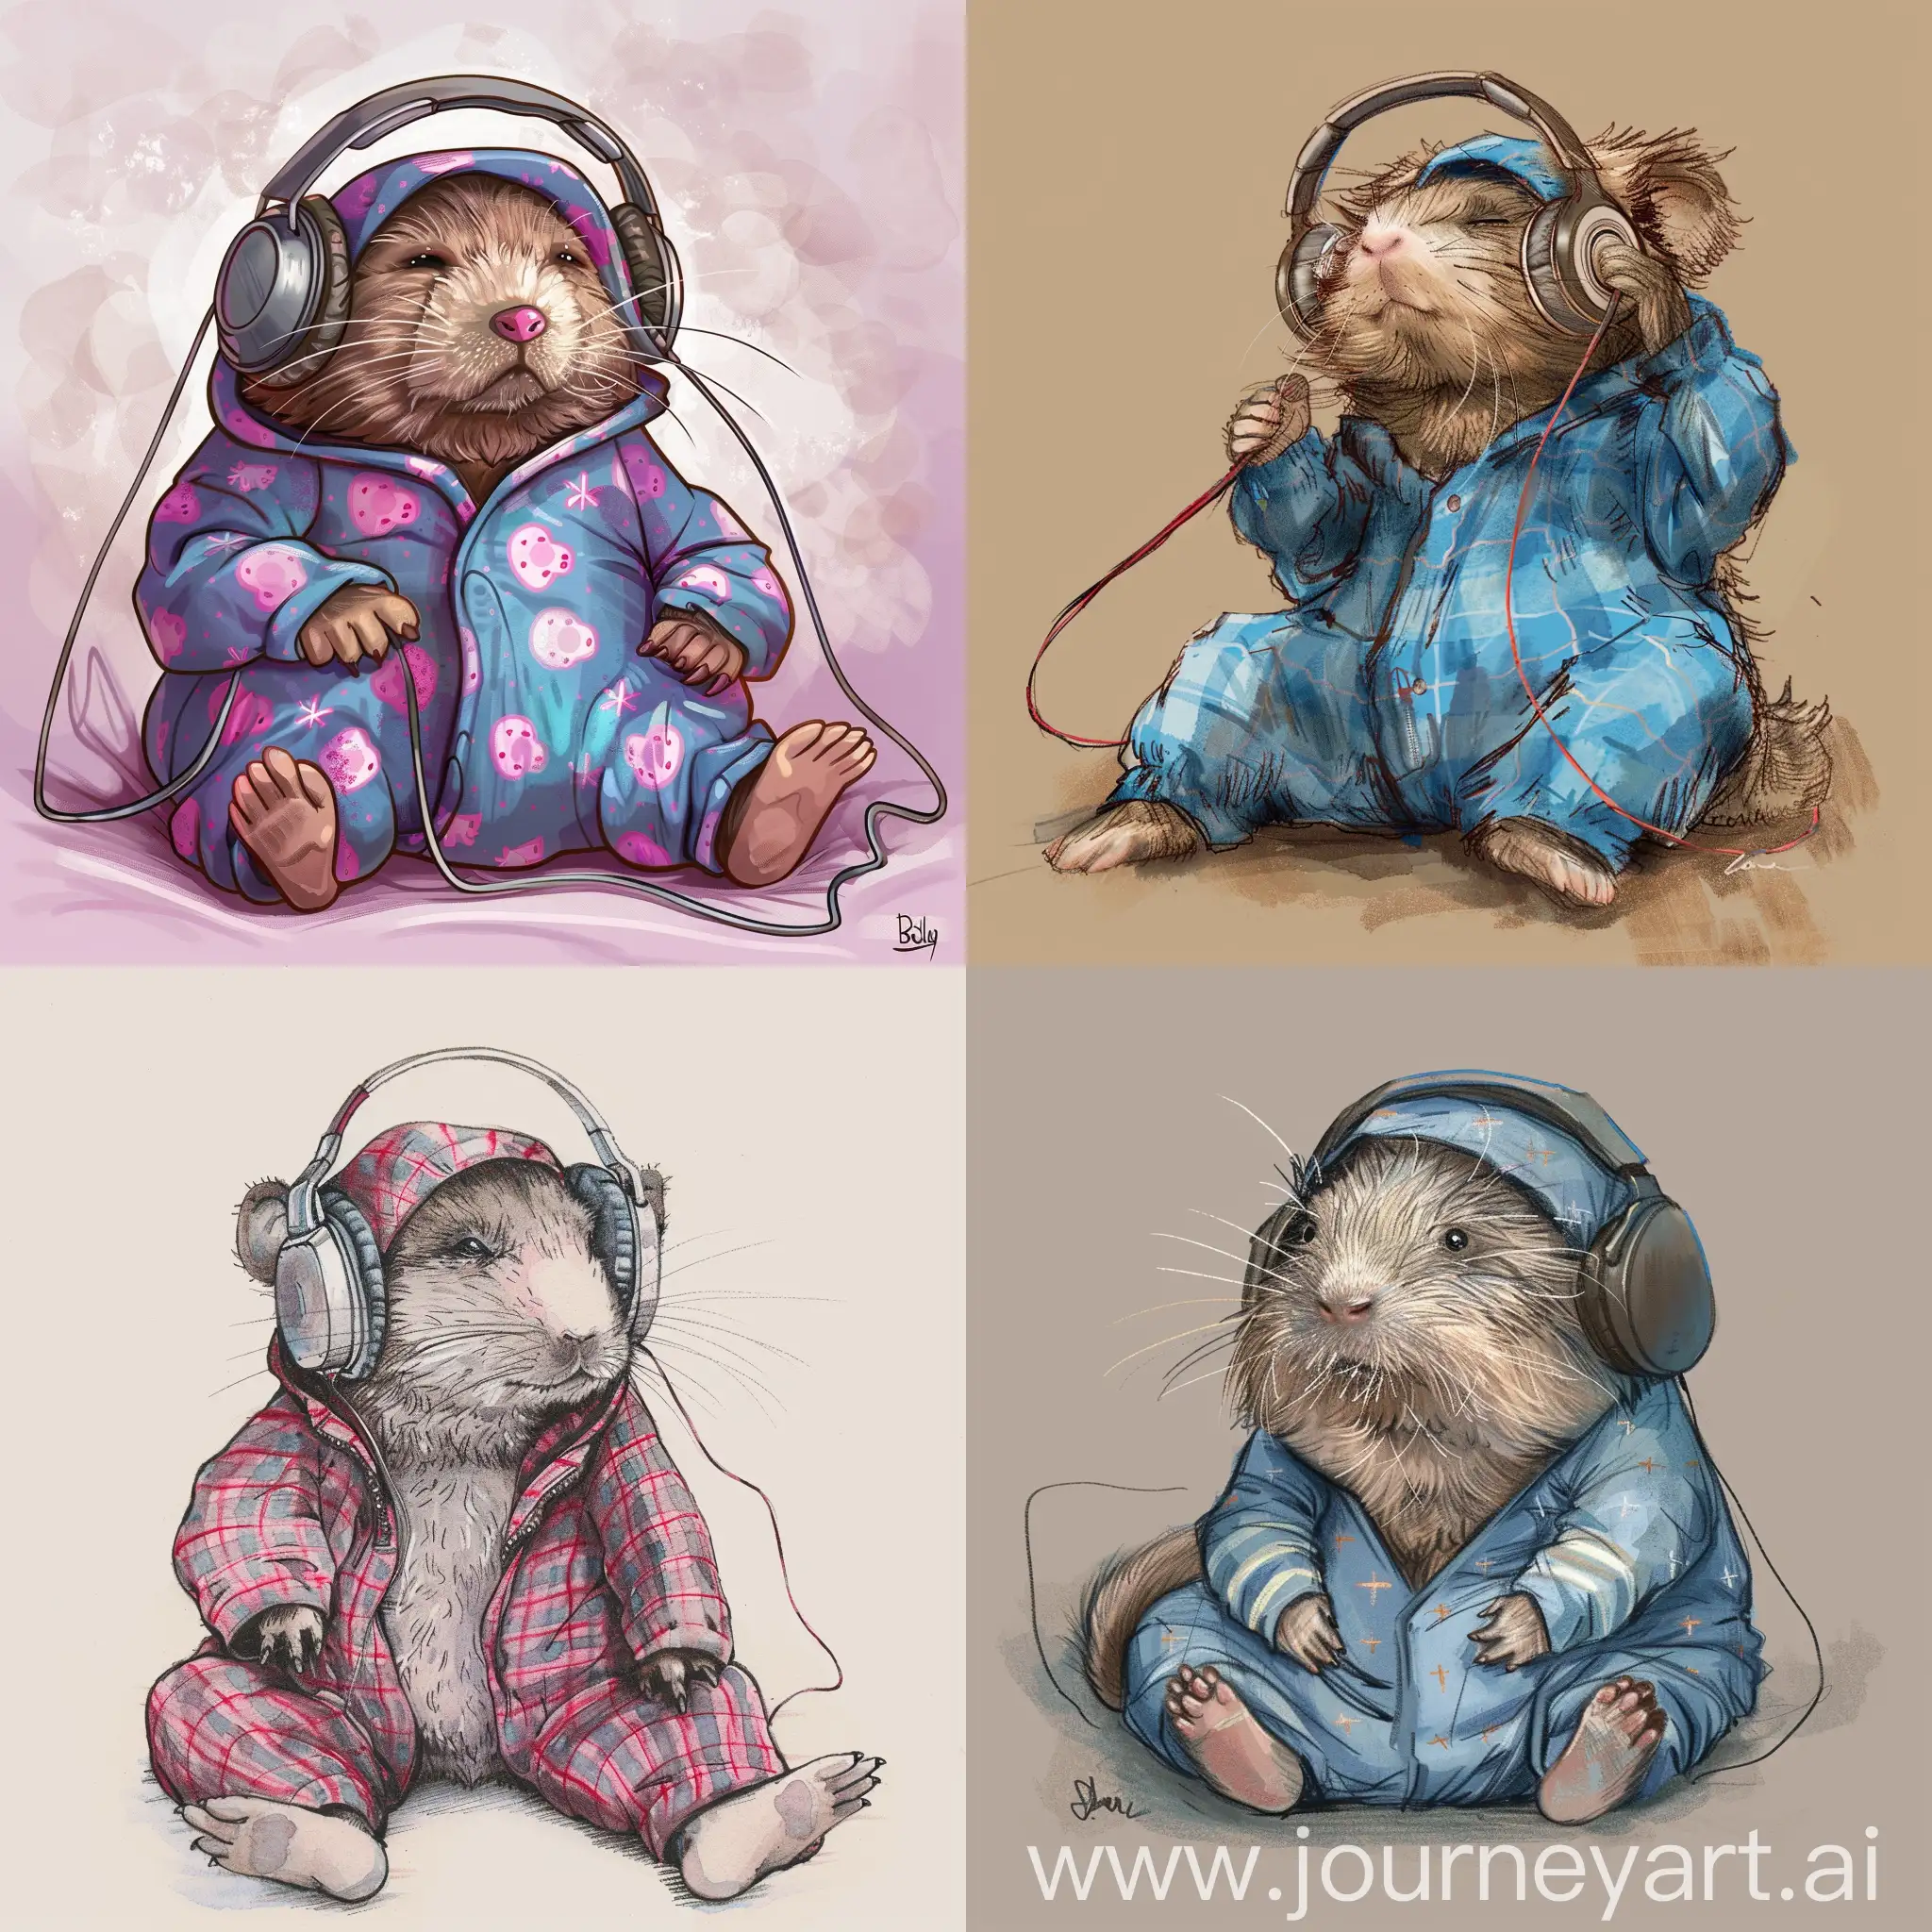 Draw a Cute mole in pajama and with big headphones in the style of Beatrix Potter